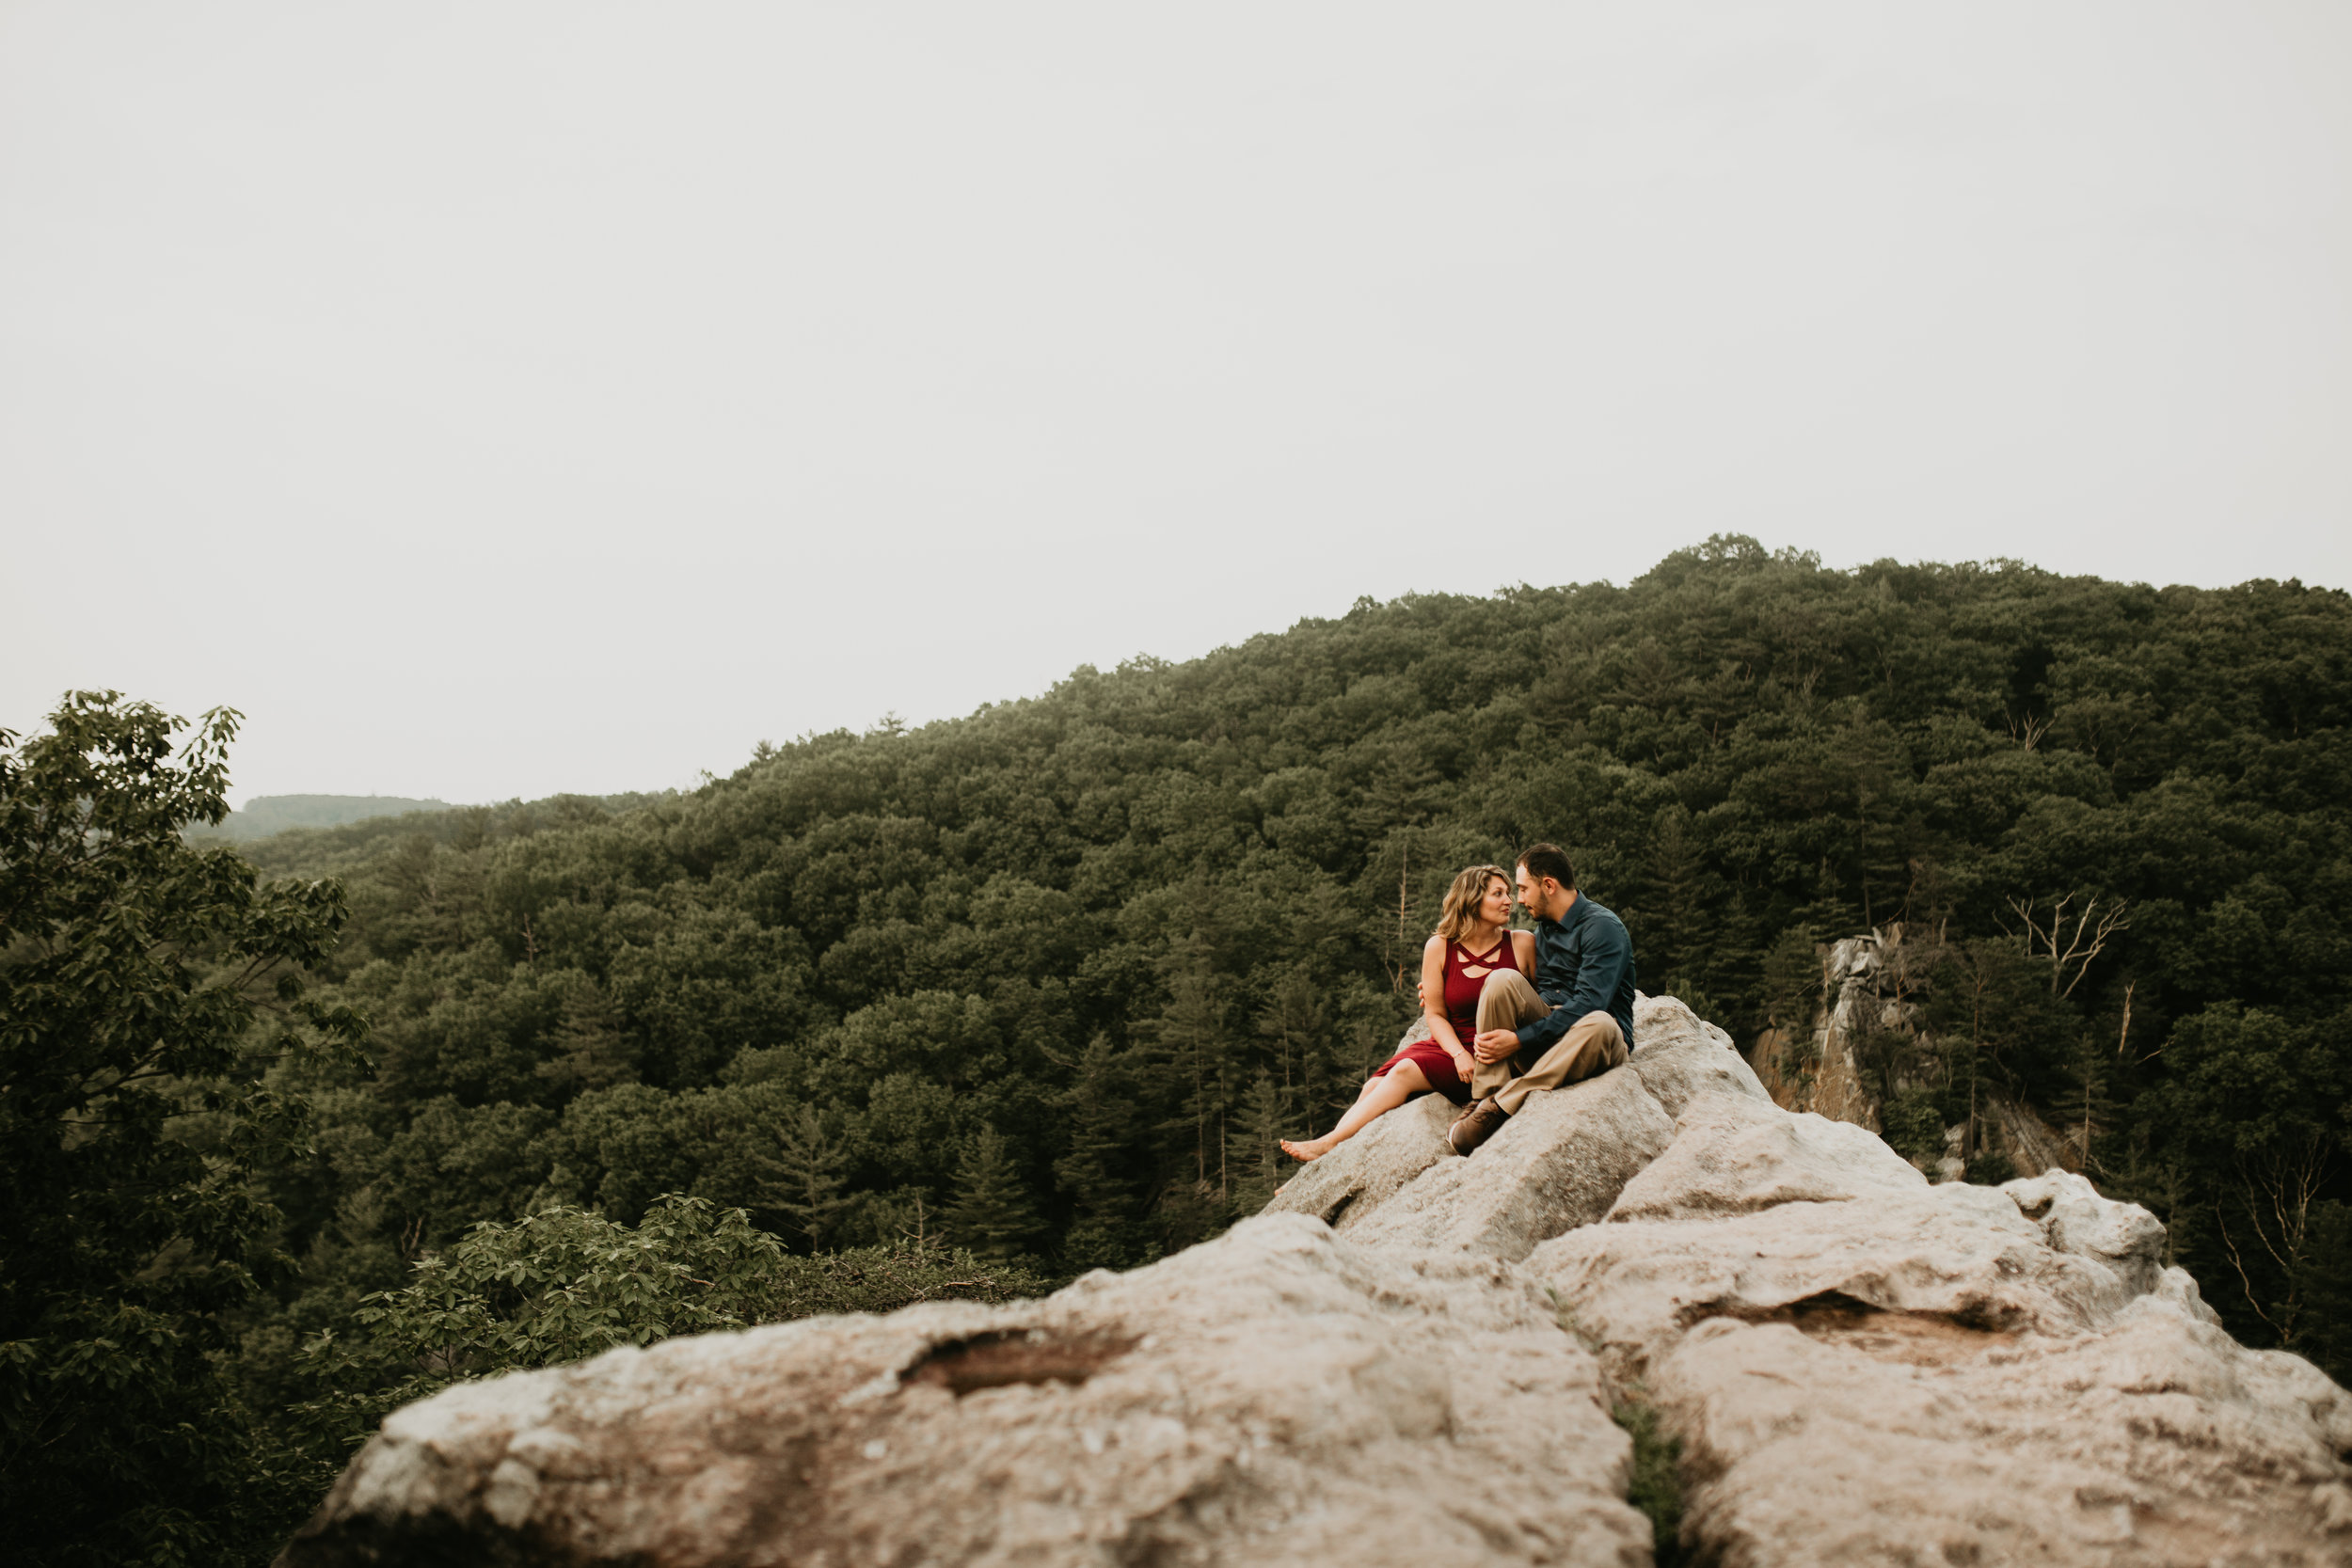 Nicole-Daacke-Photography-rock-state-park-overlook-king-queen-seat-maryland-hiking-adventure-engagement-session-photos-portraits-summer-bel-air-dog-engagement-session-31.jpg